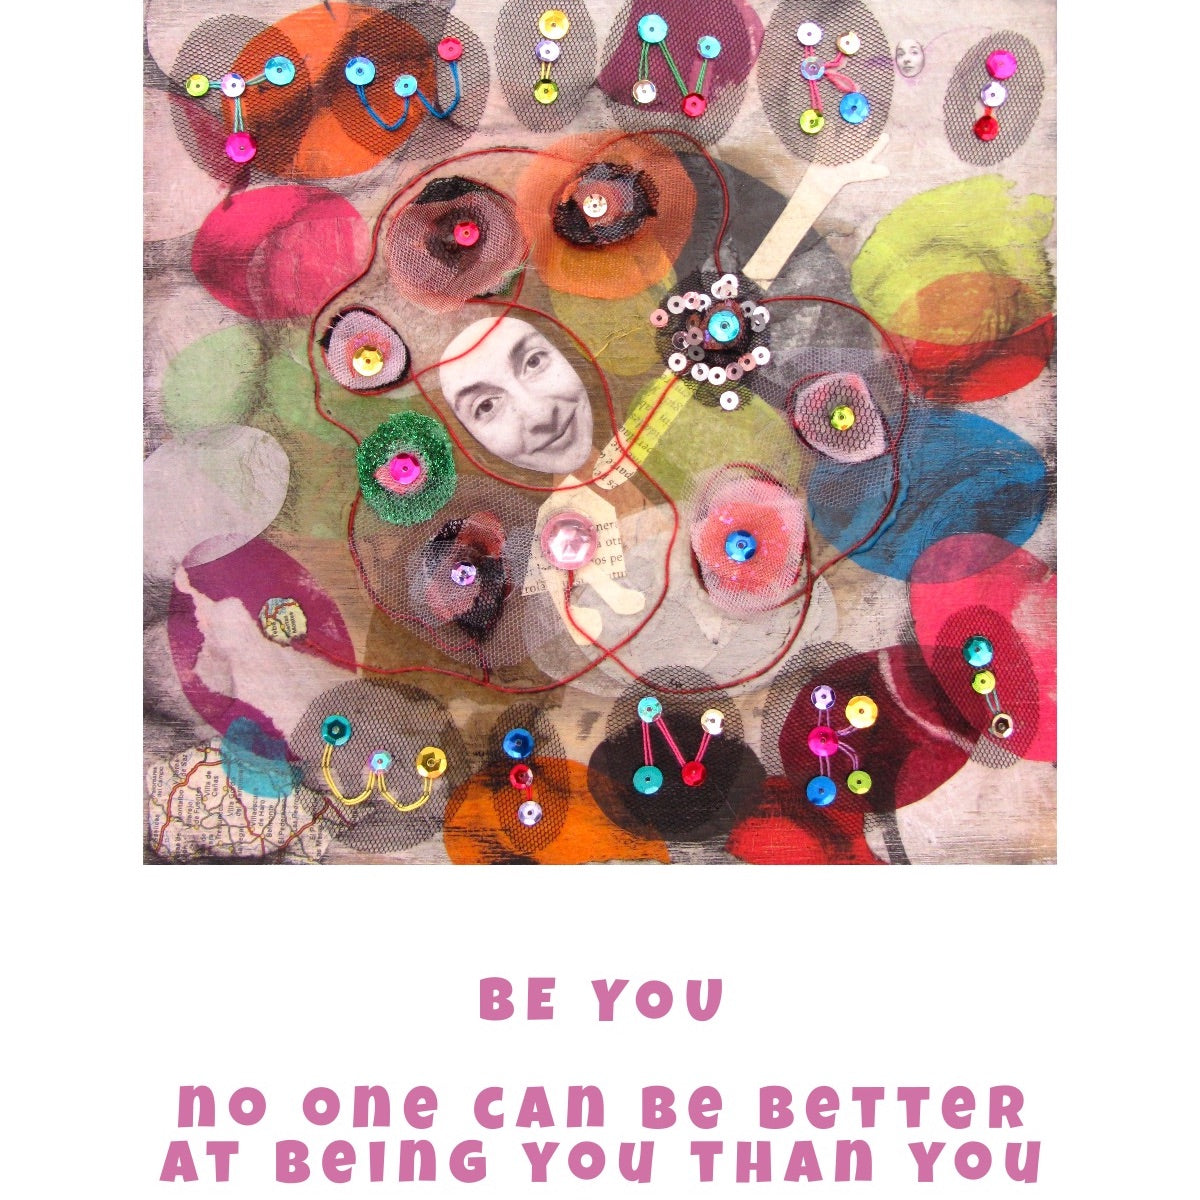 Fine art print of Alex Mitchell’s happy face surrounded by colorful shapes and textures with positive self-expression text message.